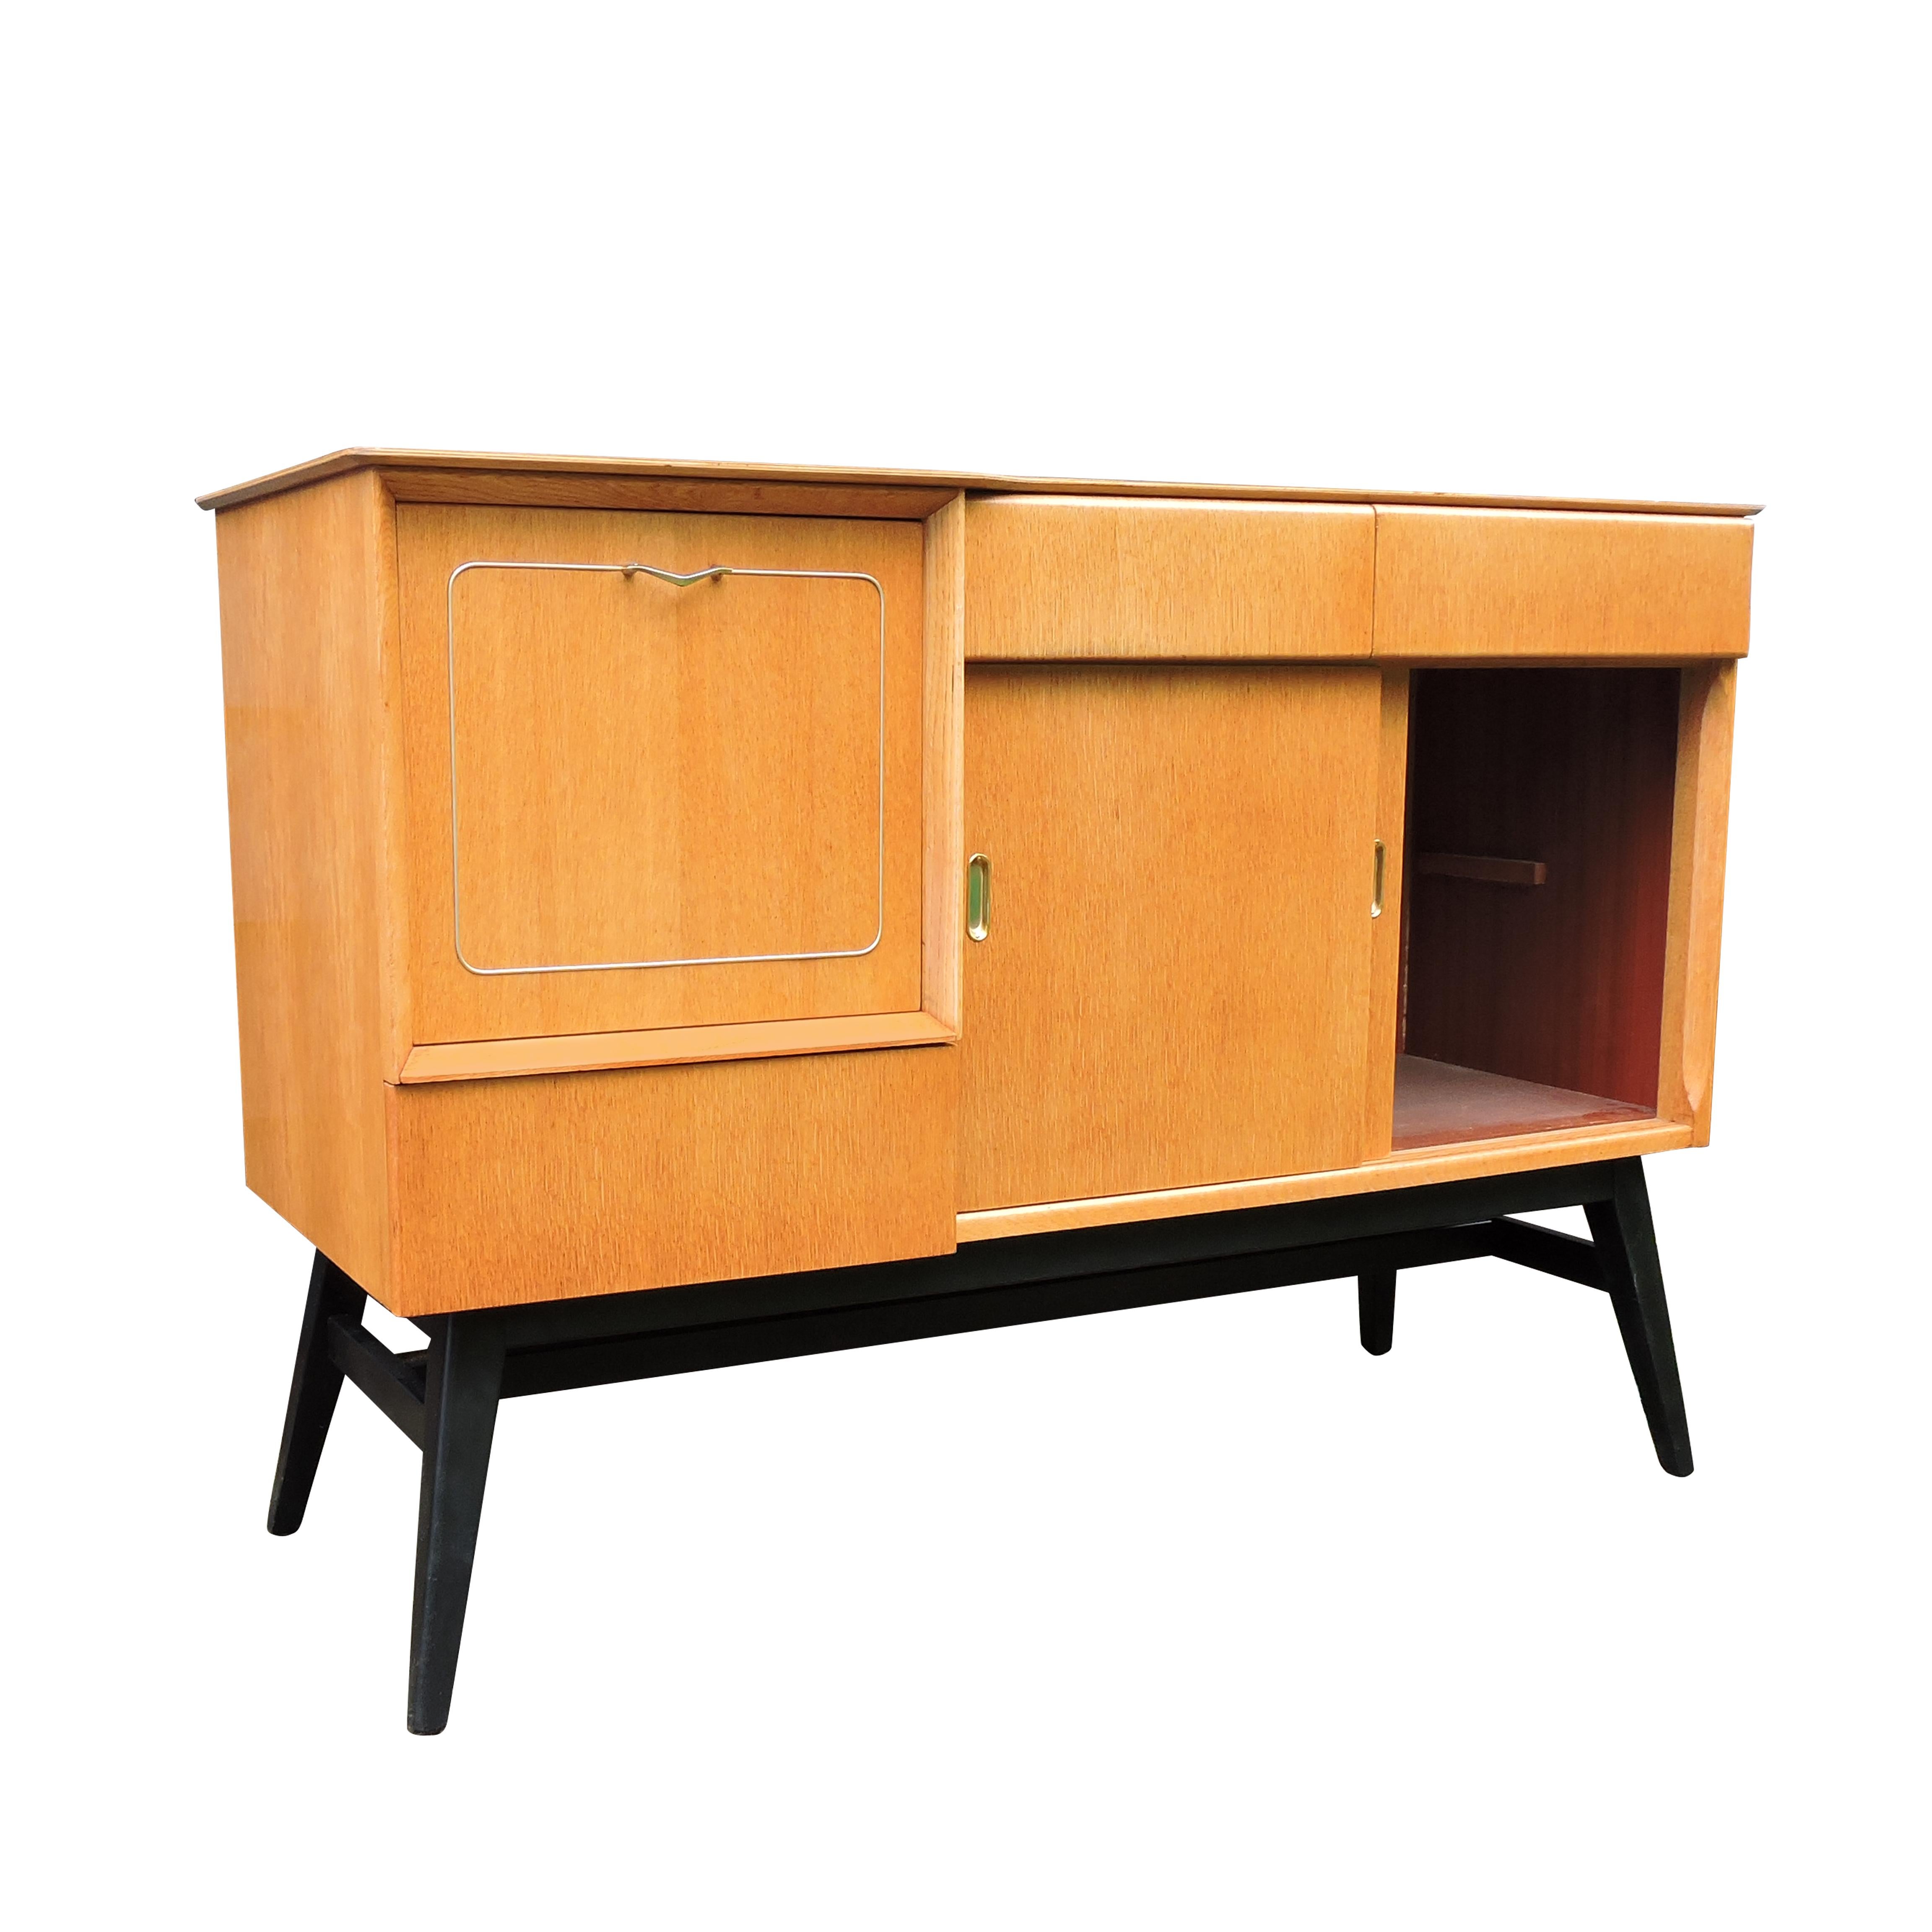 A midcentury light oak sideboard with upper drawers, a flip down cabinet, and sliding doors. It features fine brass detailing and tapered black legs.